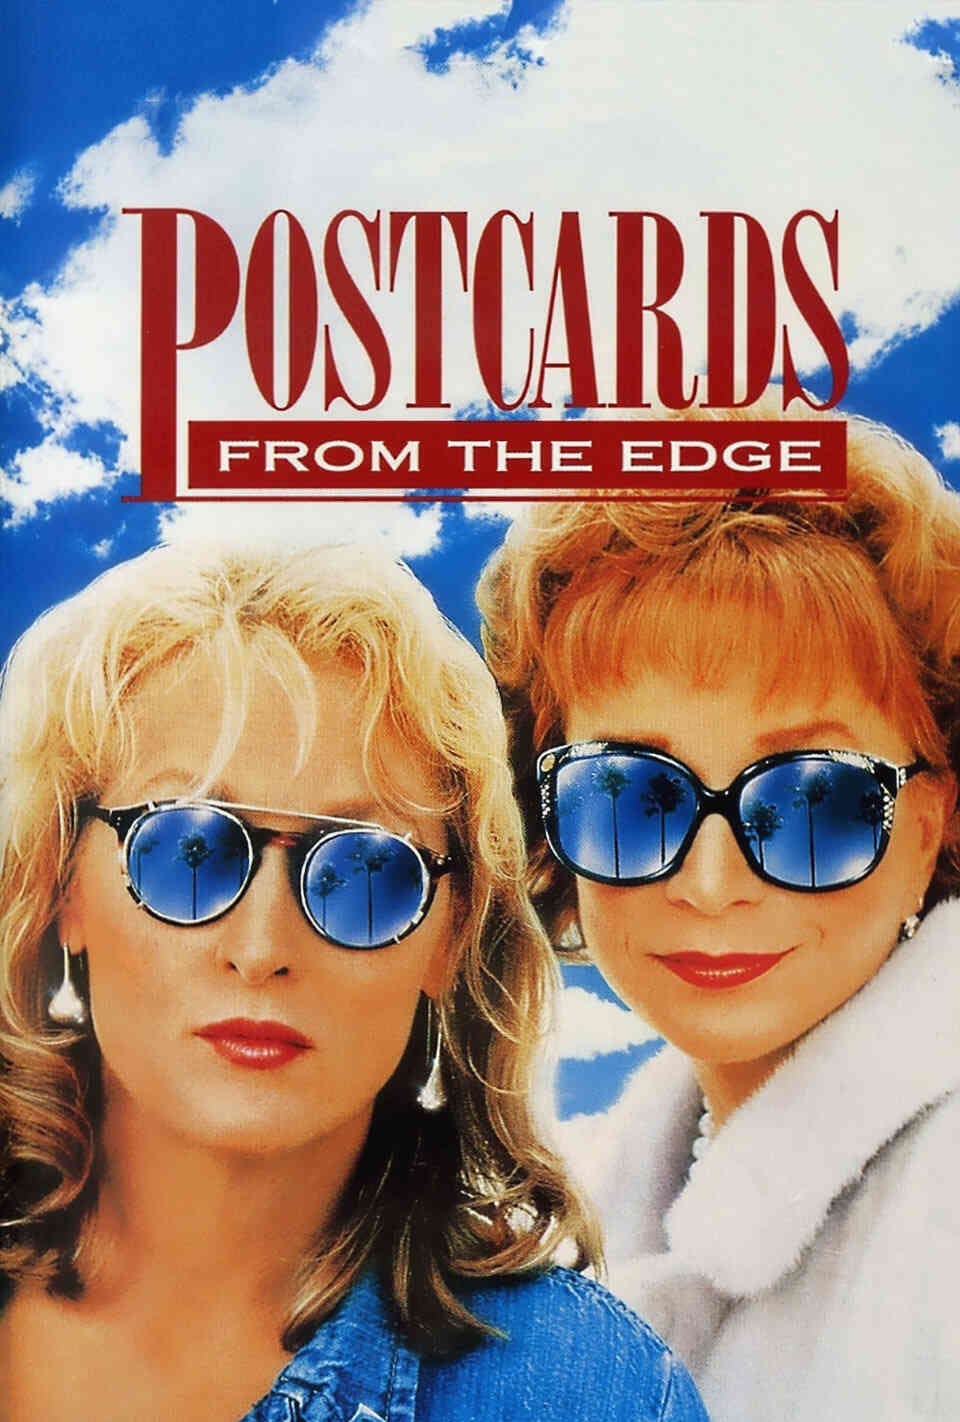 Read Postcards from the Edge screenplay (poster)